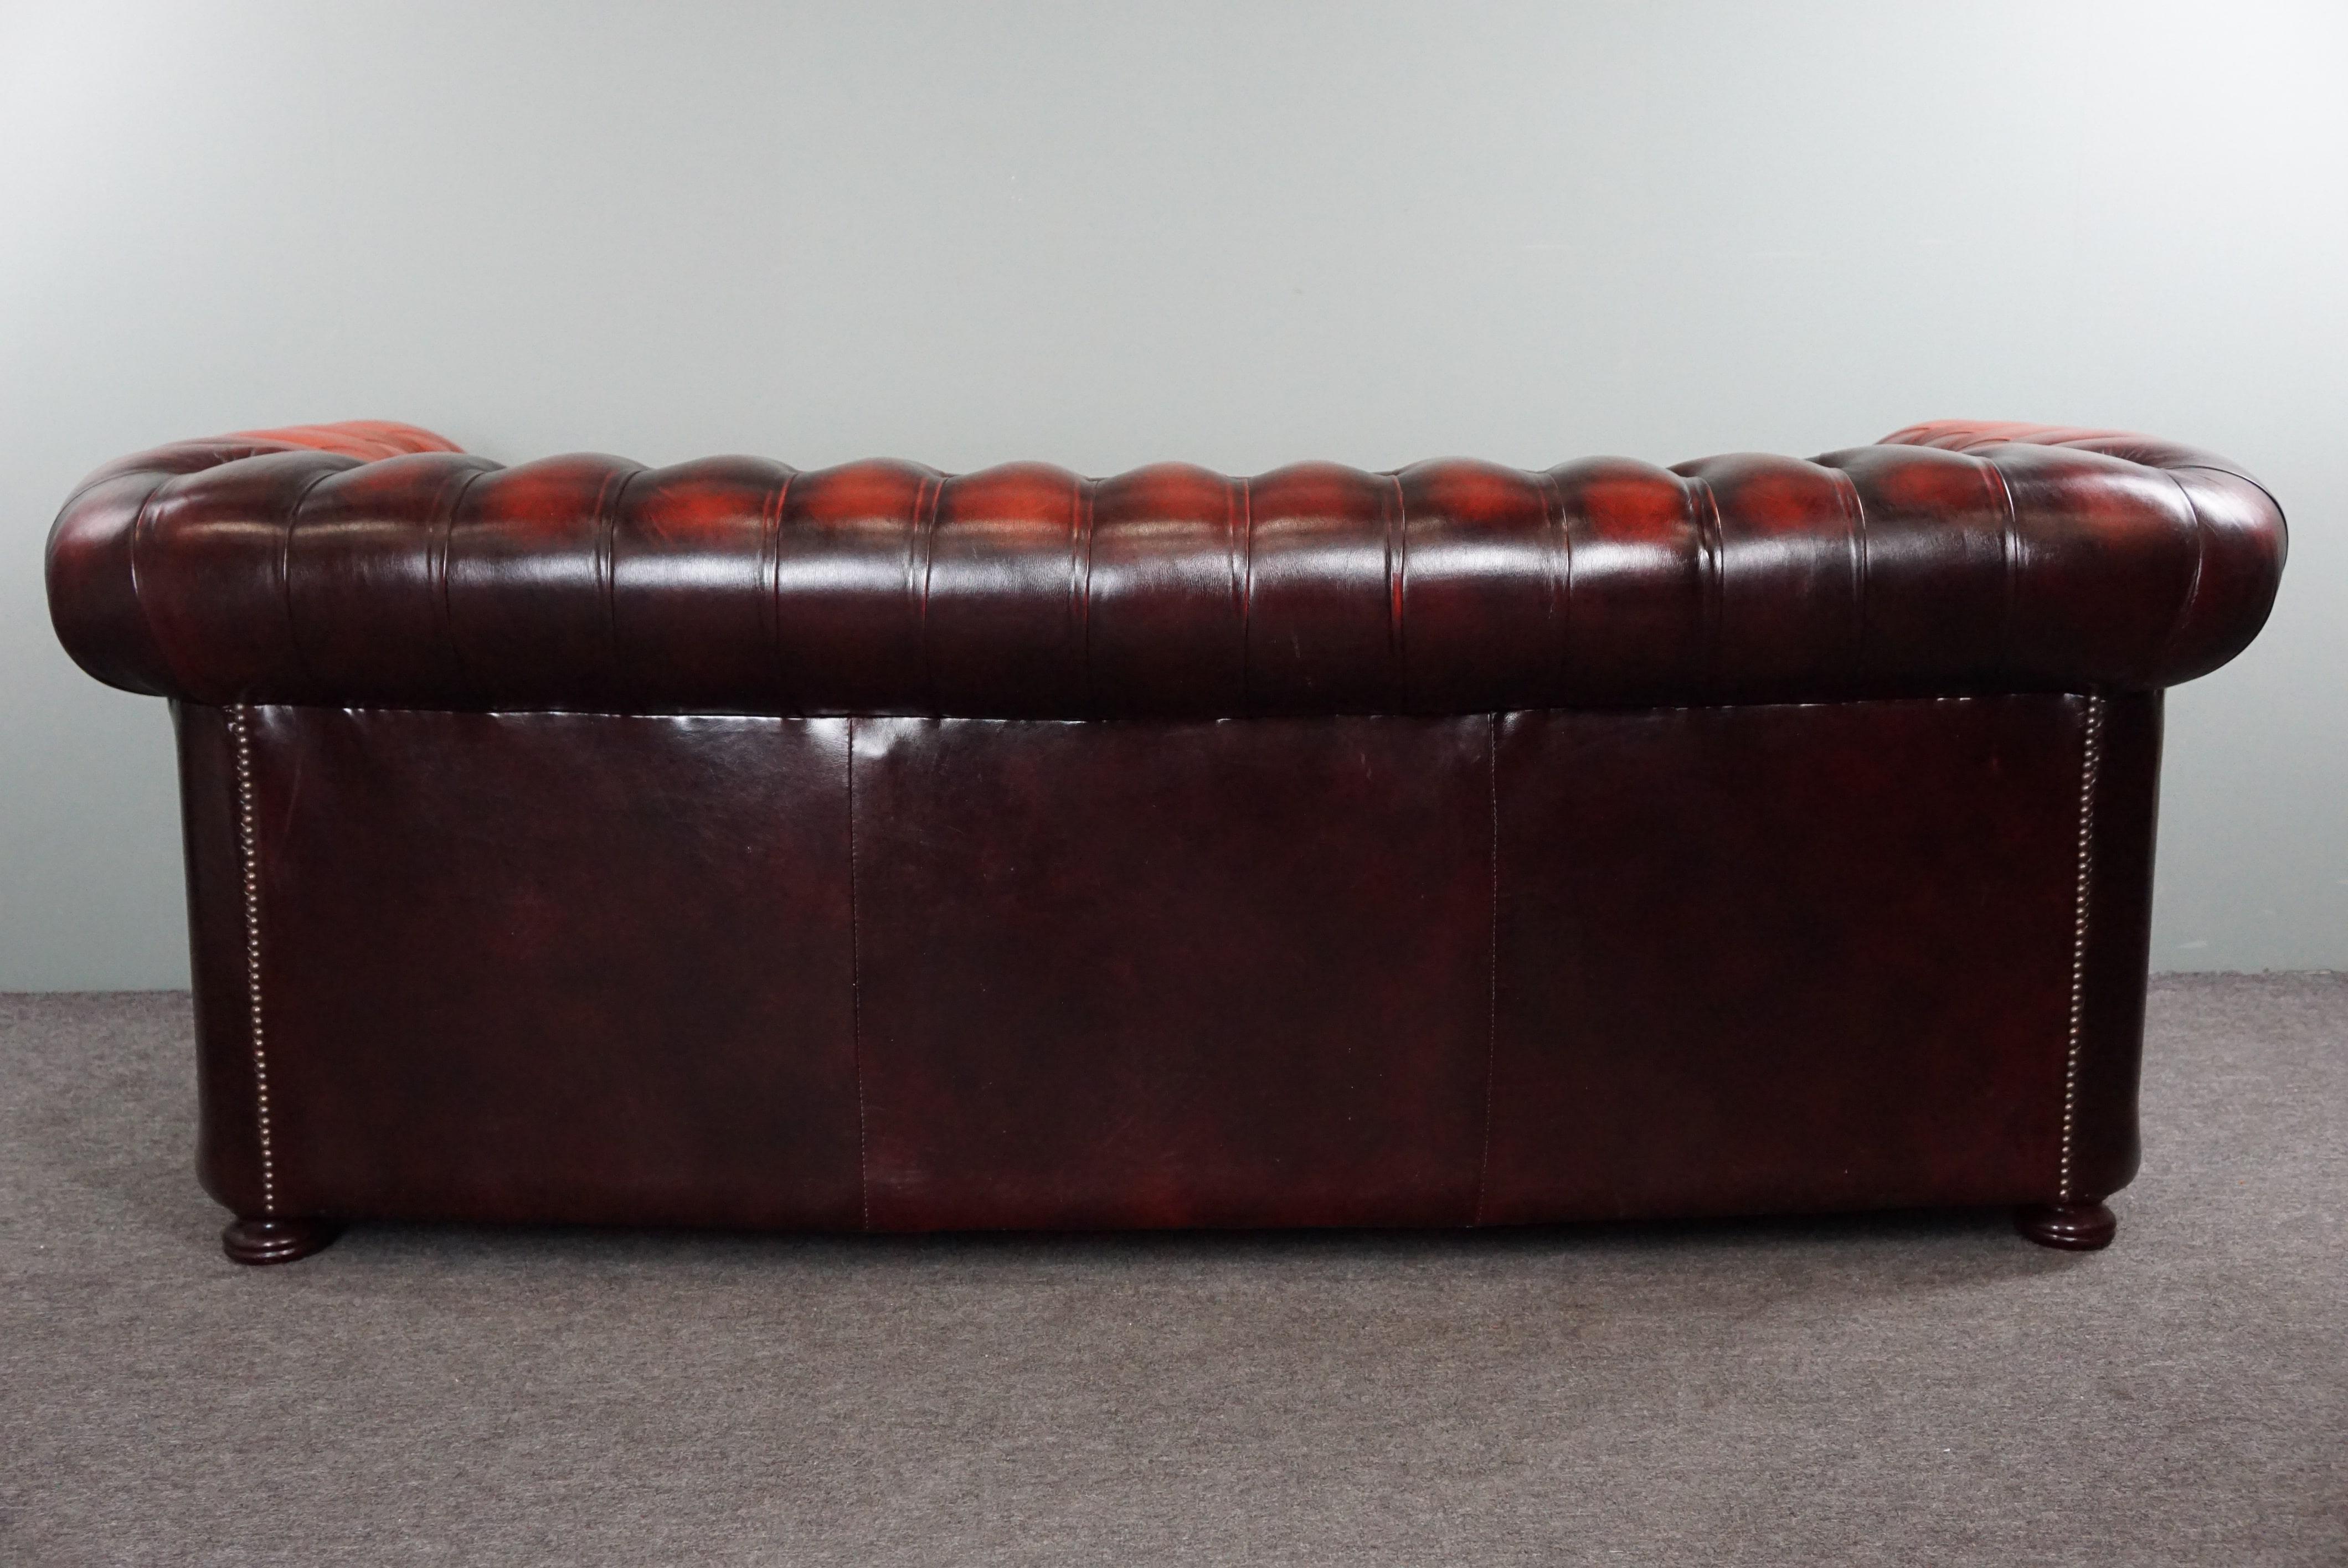 English Beautiful colored red spacious cow leather Chesterfield sofa, 2.5 seater For Sale